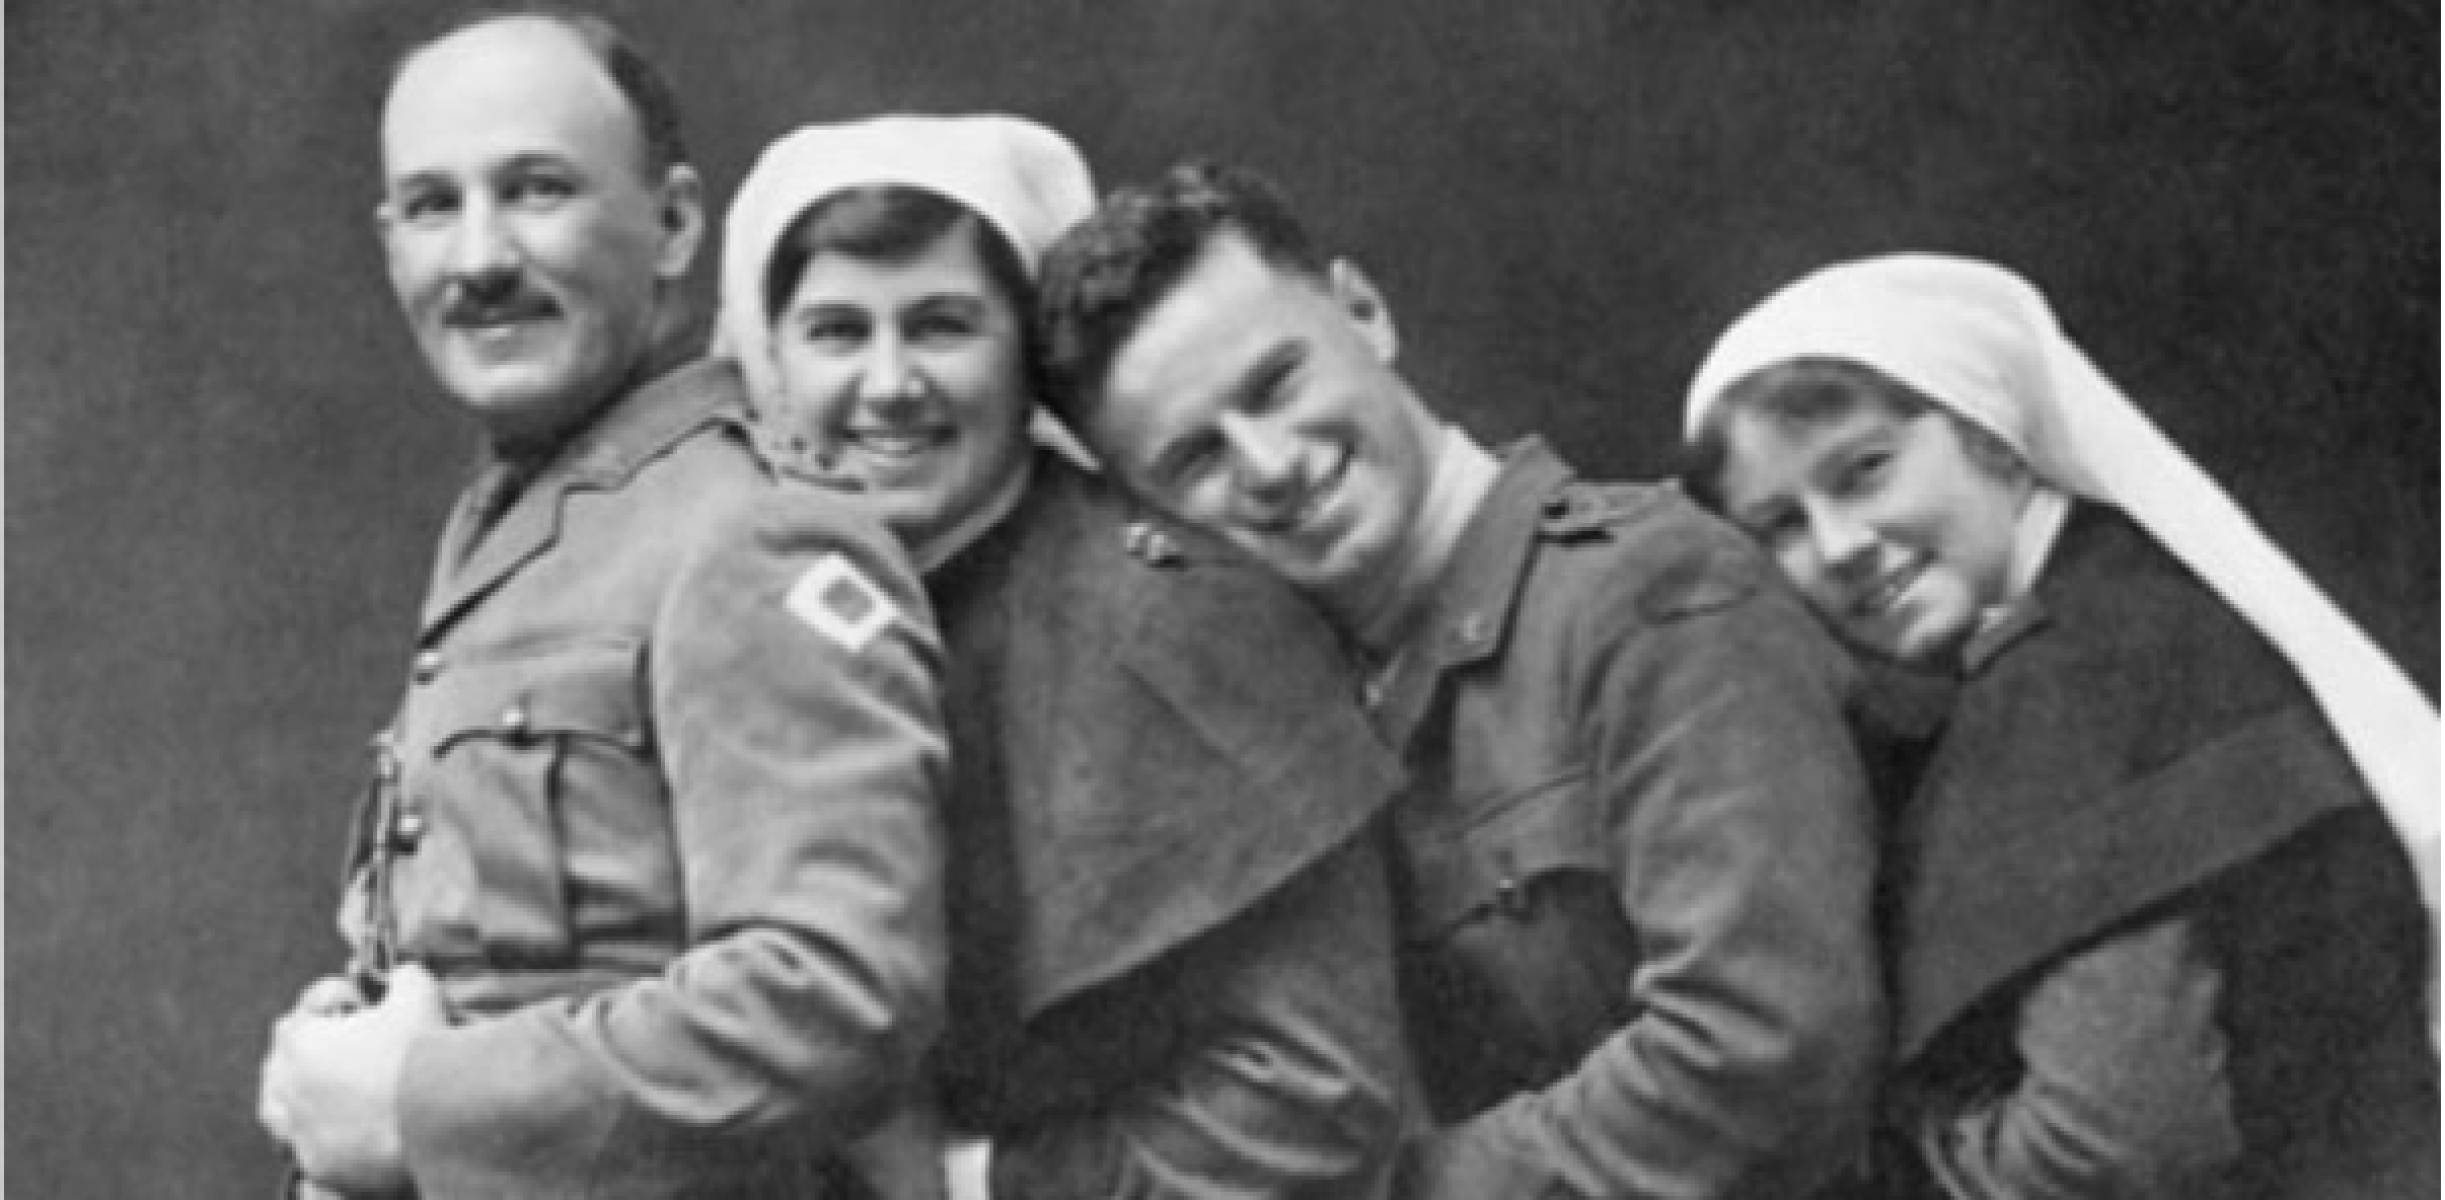 Four Malcolm siblings who enlisted in the First World War: Norman, Stella, Eric and Edith